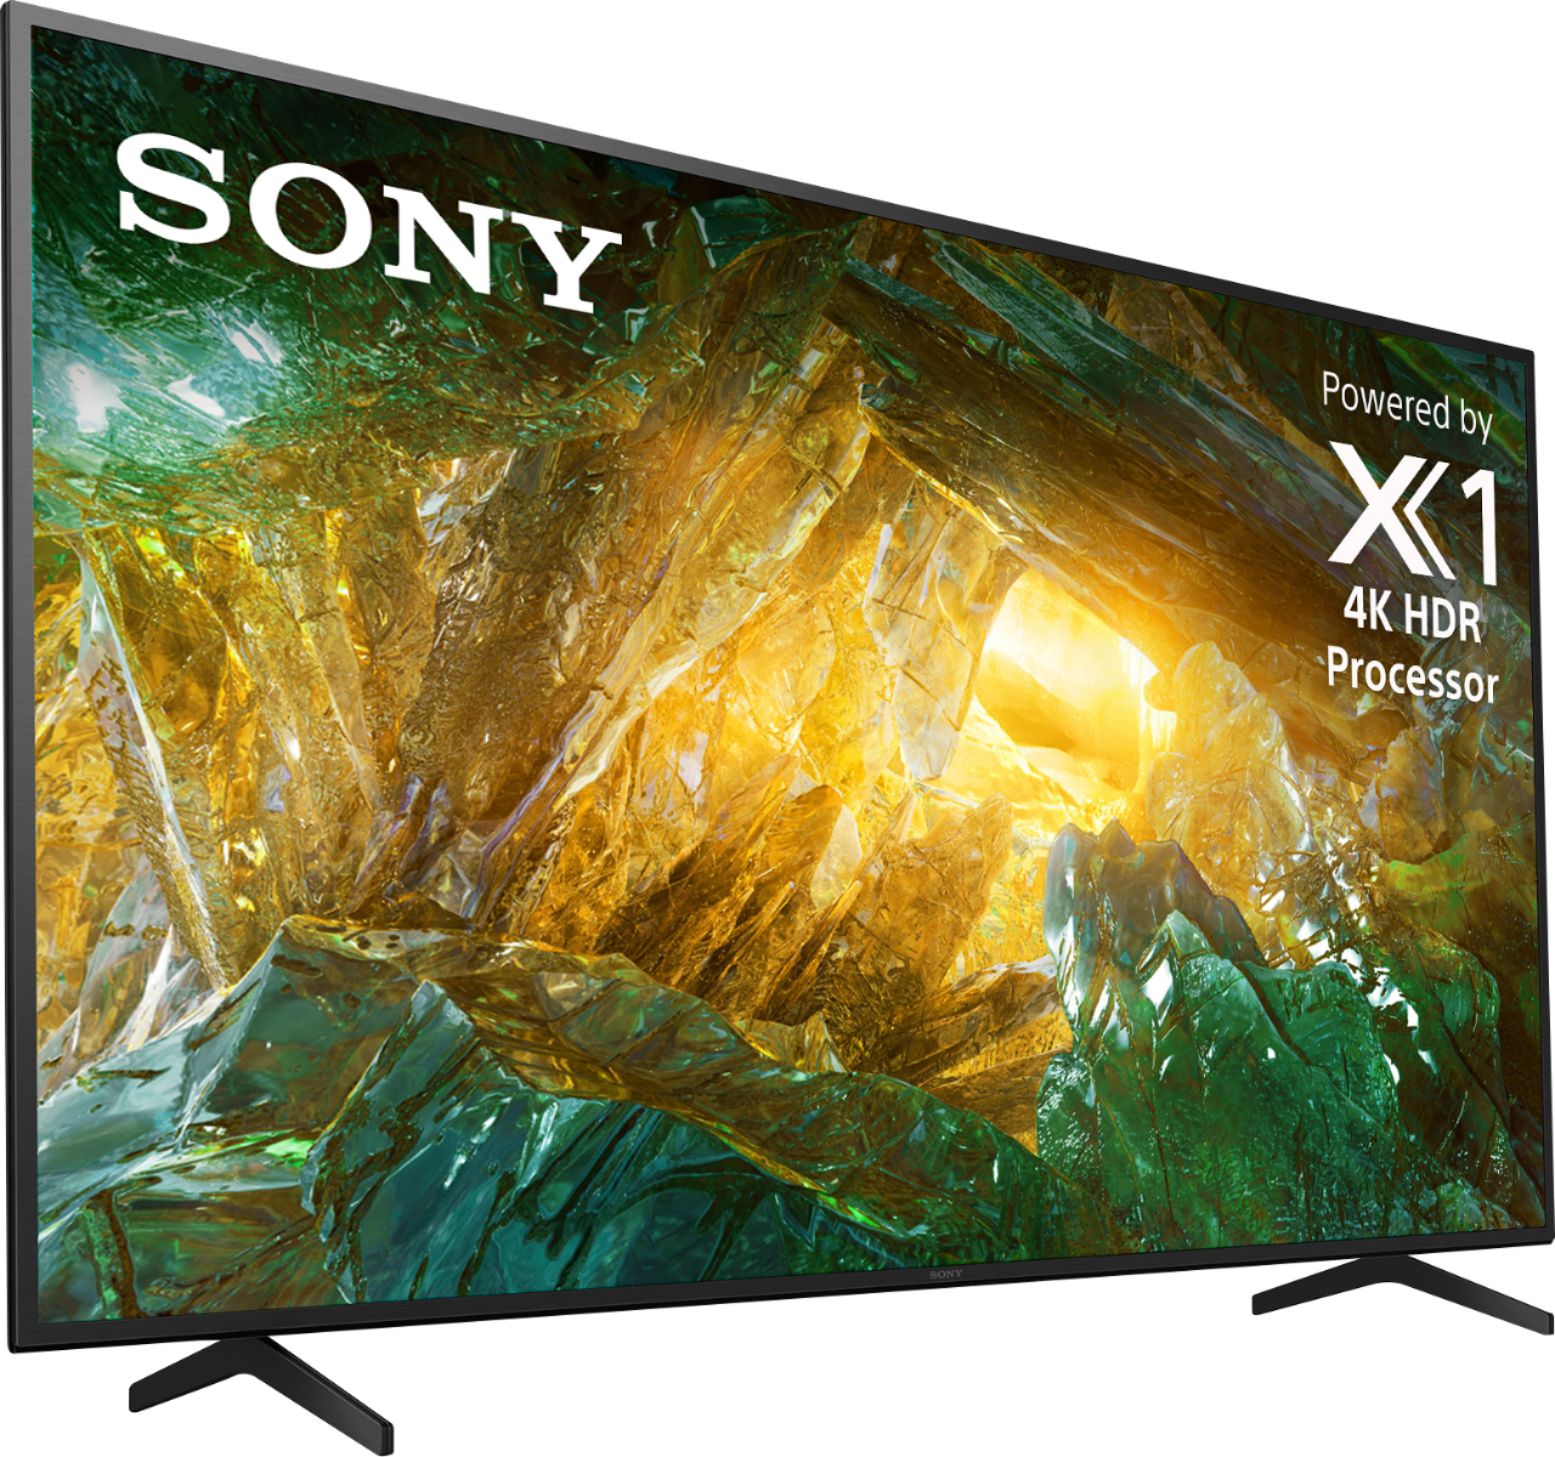 Angle View: Sony - 55" Class X800H Series LED 4K UHD Smart Android TV